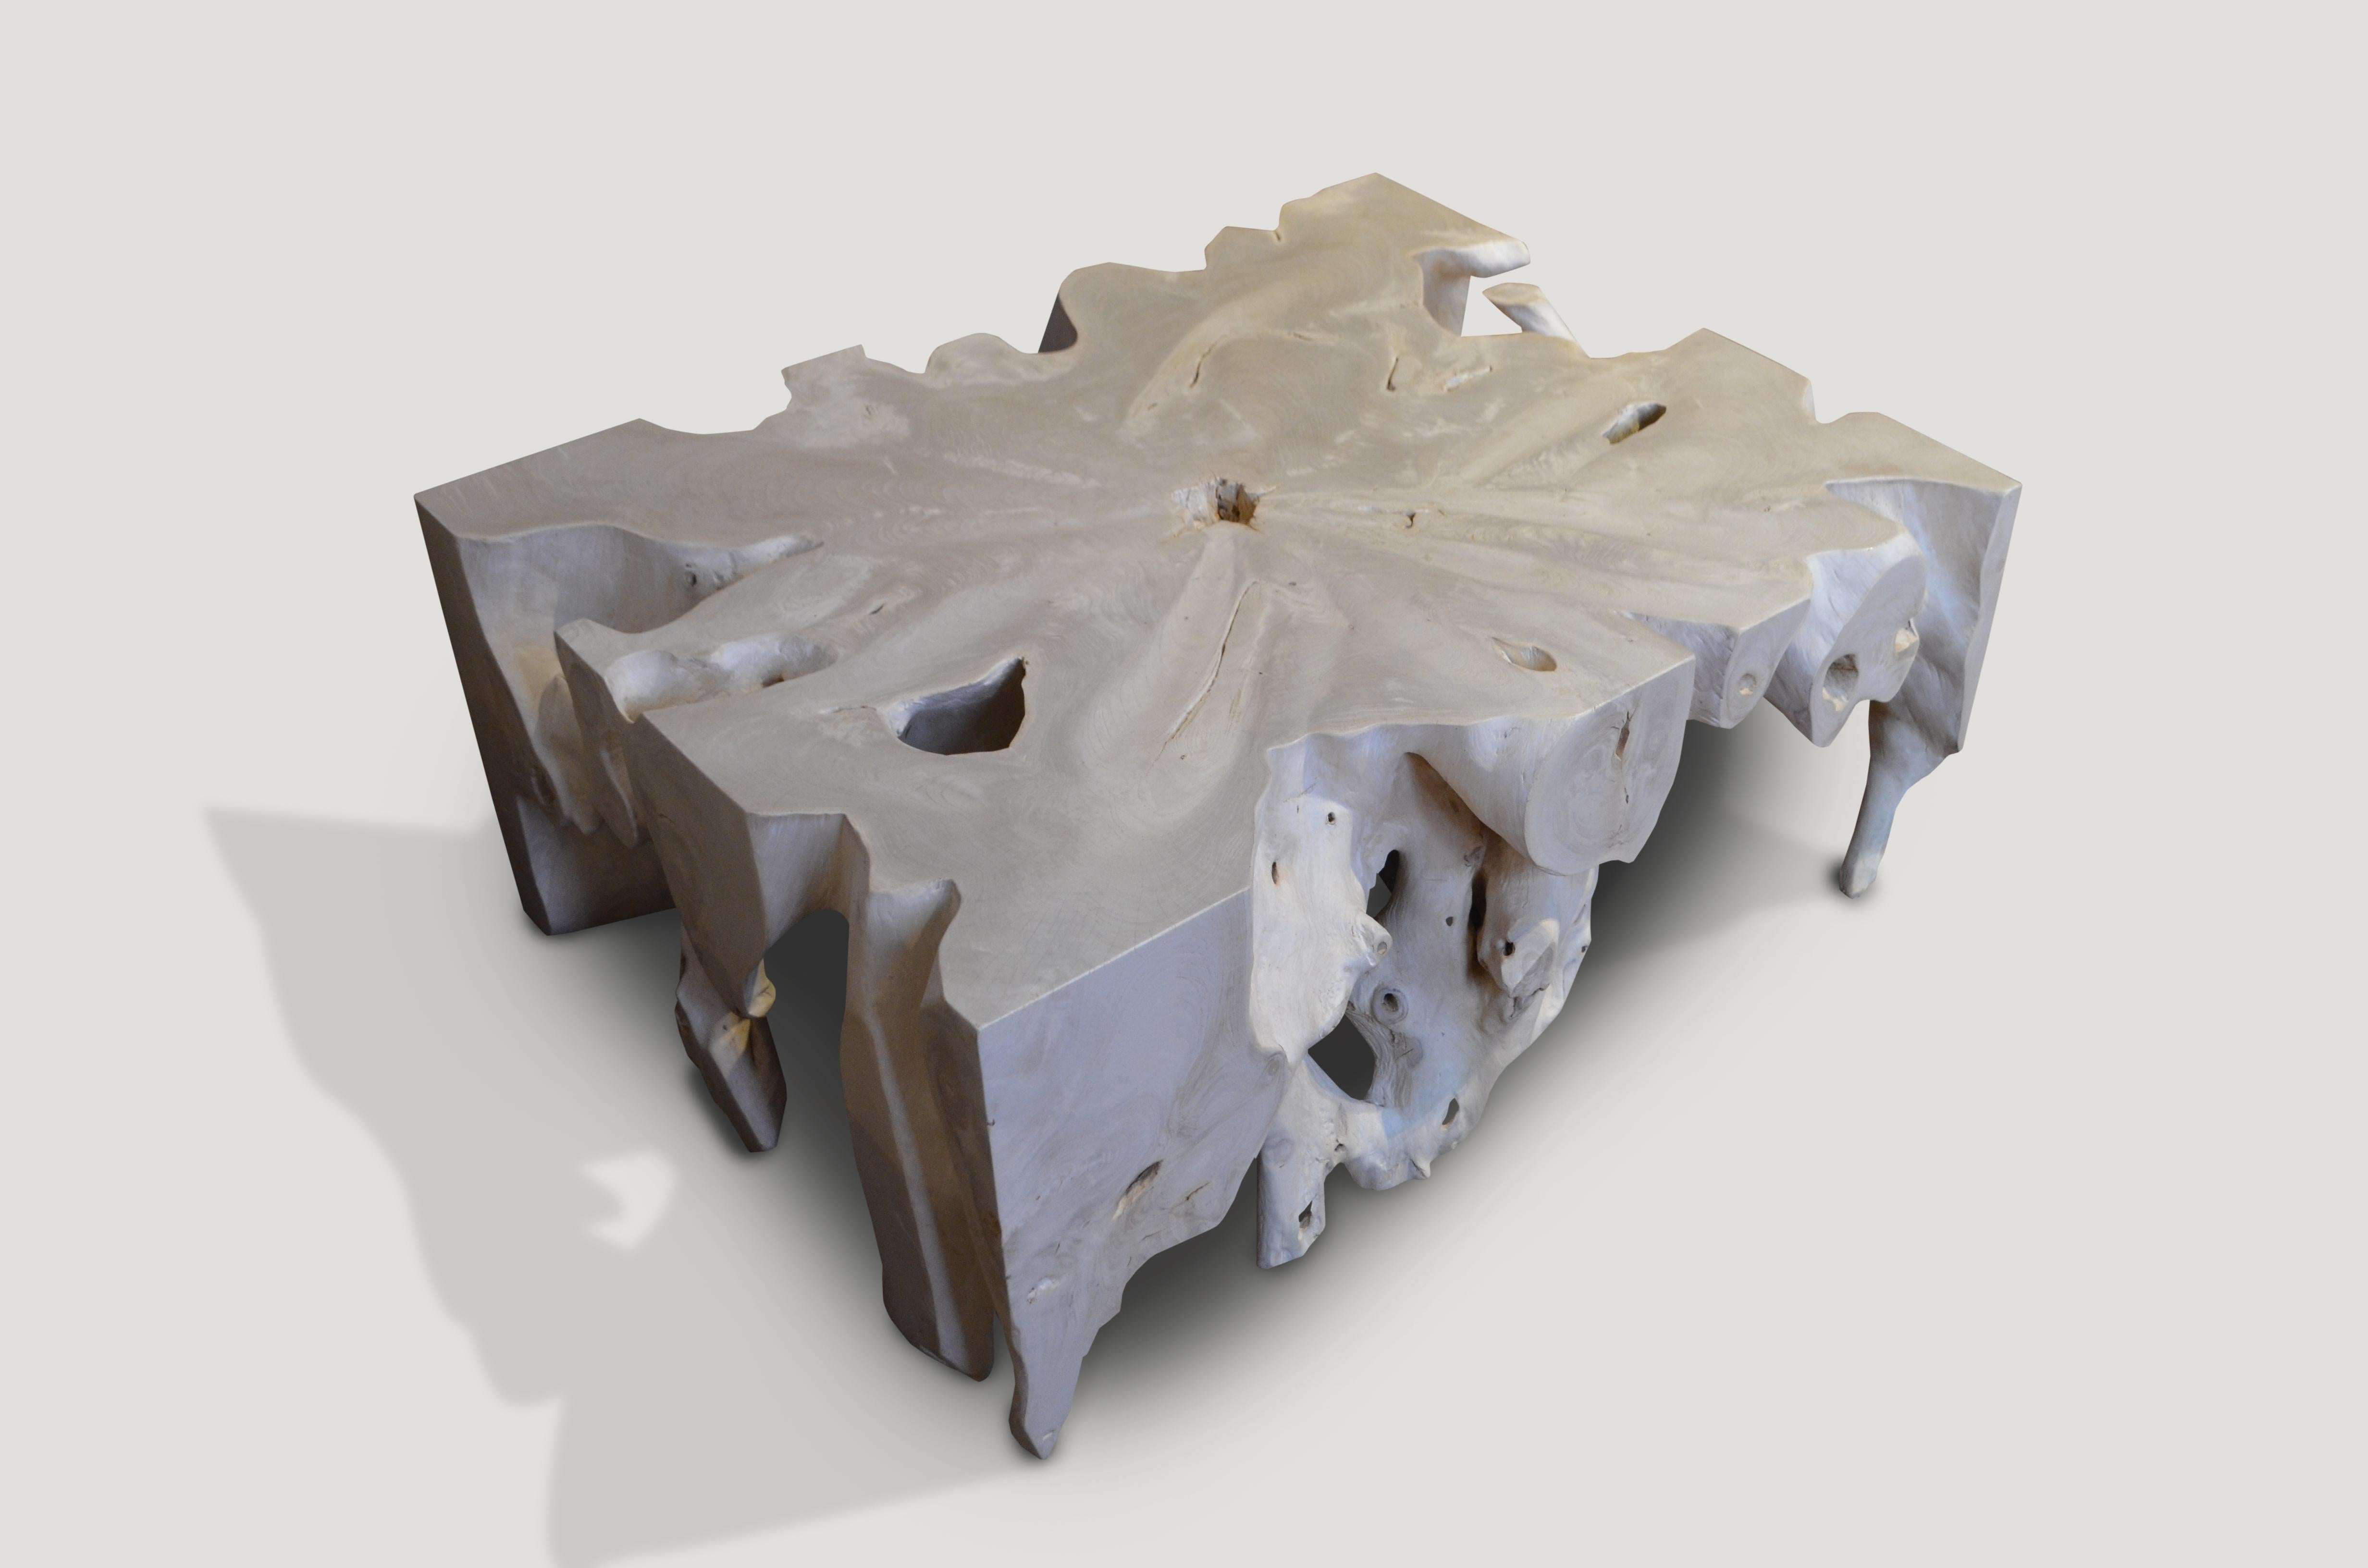 Impressive single root coffee table hand carved in to this usable shape. The reclaimed teak is bleached and left to bake in the sun and sea salt air for over a year to achieve this unique finish.

The St. Barts collection features an exciting new